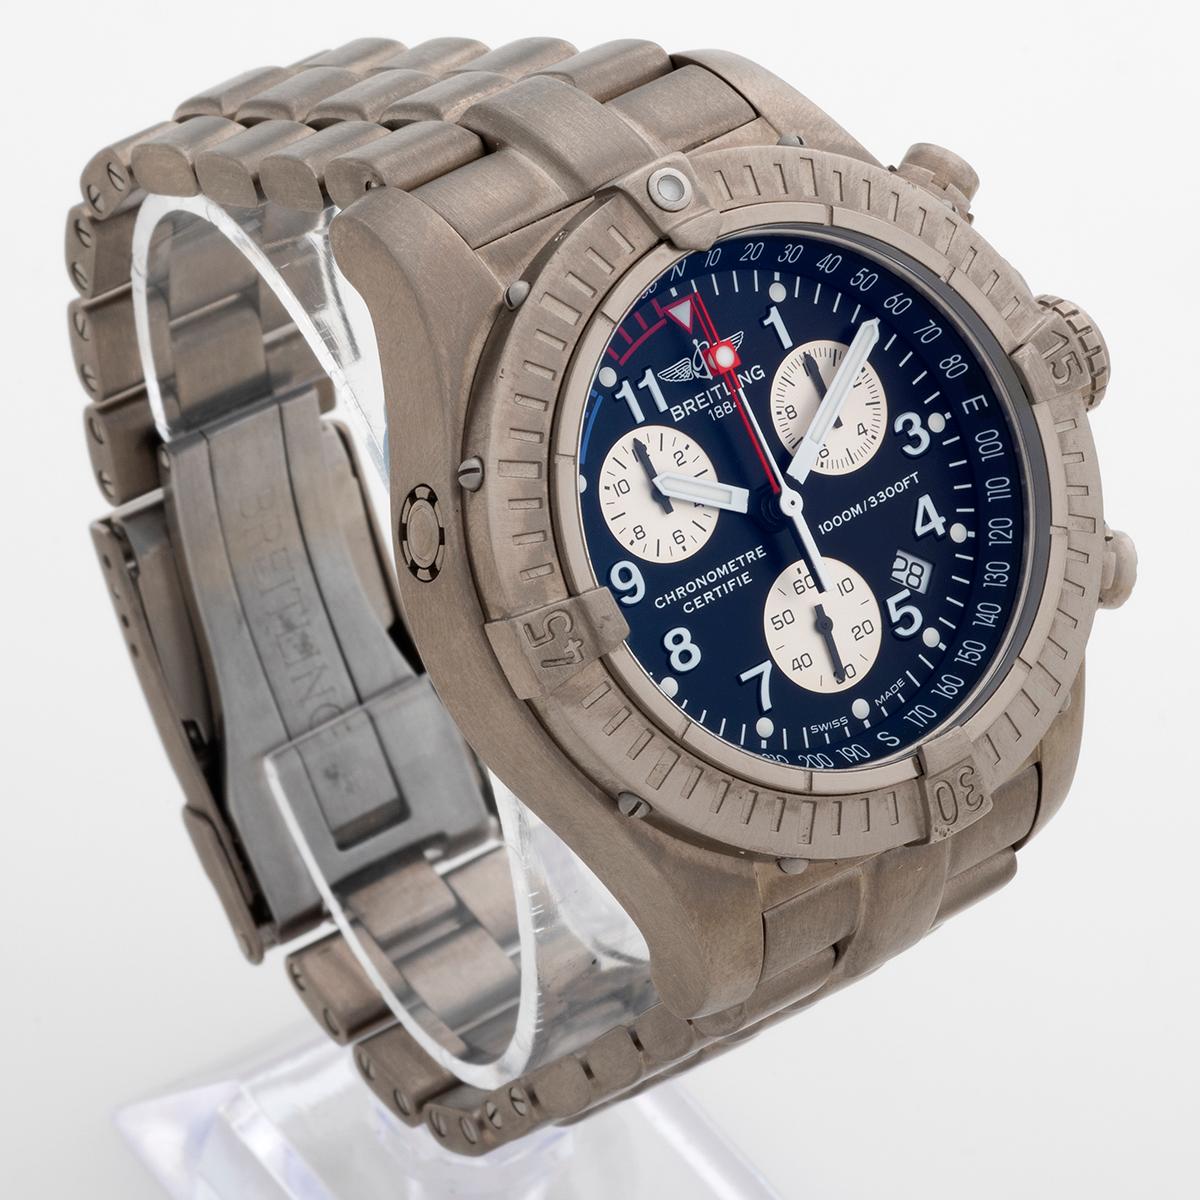 Our stunning Breitling Chrono Avenger M1, reference E73360 features a titanium case and factory length titanium bracelet with black dial, chronograph and date functions. A complete set with light signs of use from new, our example comprises inner